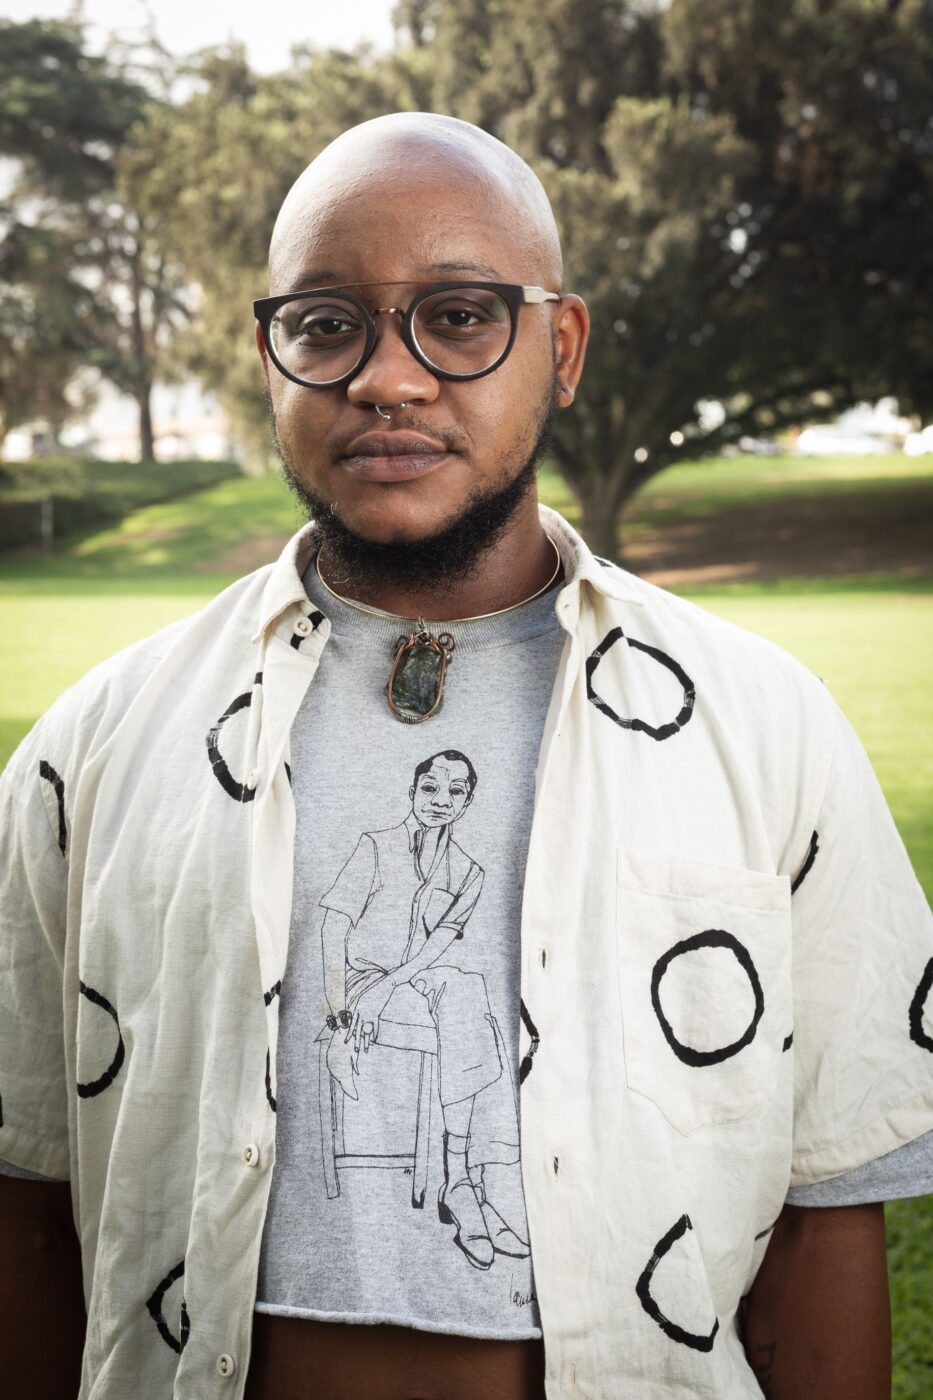 Jaden, a brown-skinned black trans man with a bald head, round glasses, a septum ring, wearing a light gray cropped shirt with an illustration of James Baldwin, a light beige unbuttoned shirt with Black circles on it, and a Labradorite crystal choker necklace.